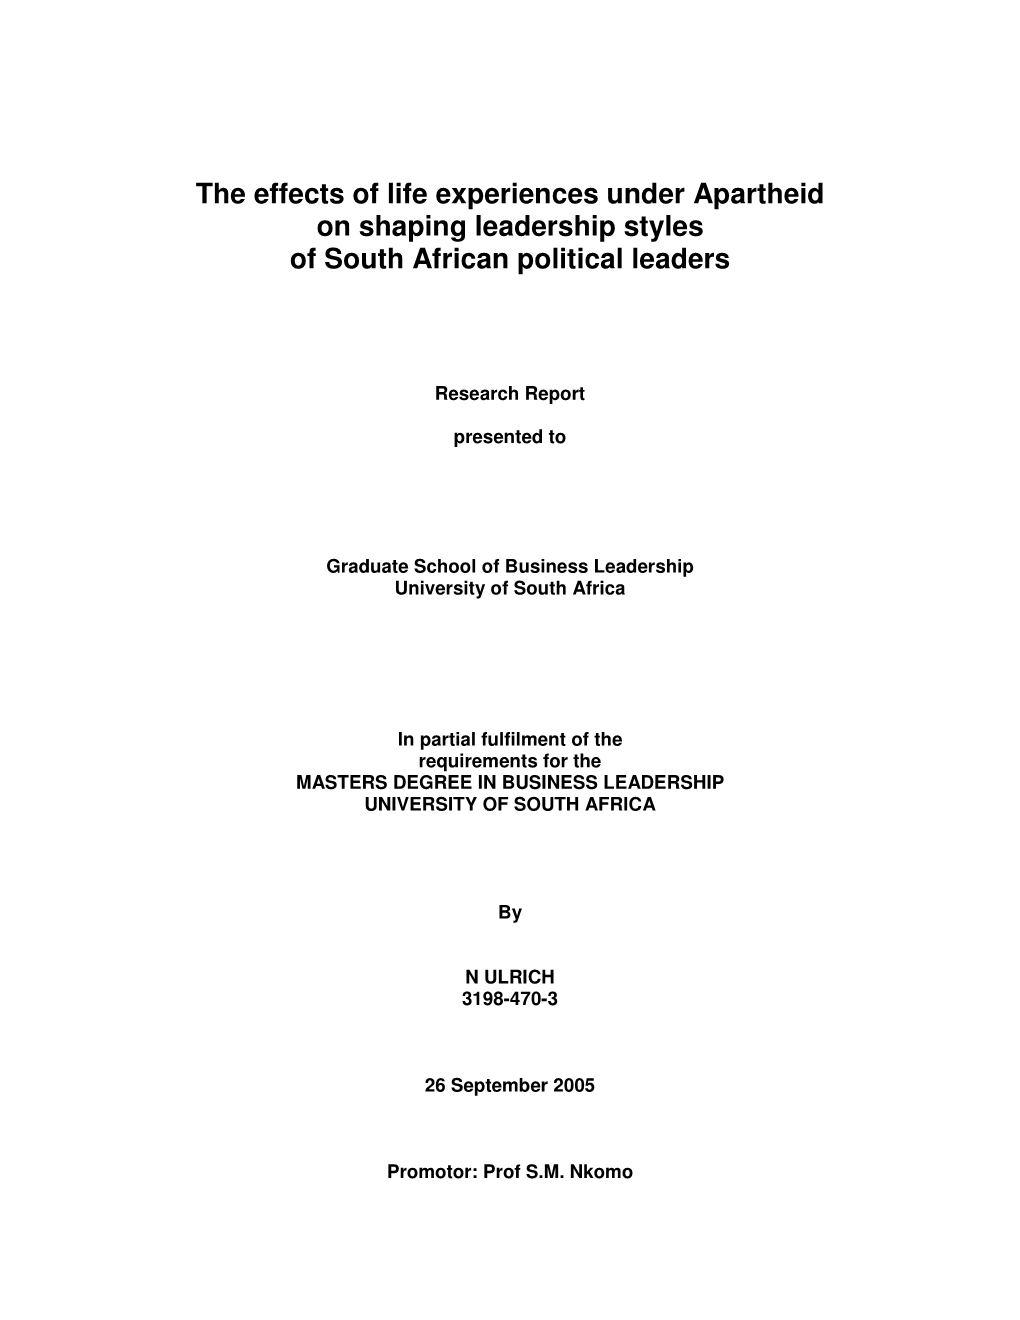 The Effects of Life Experiences Under Apartheid on Shaping Leadership Styles of South African Political Leaders